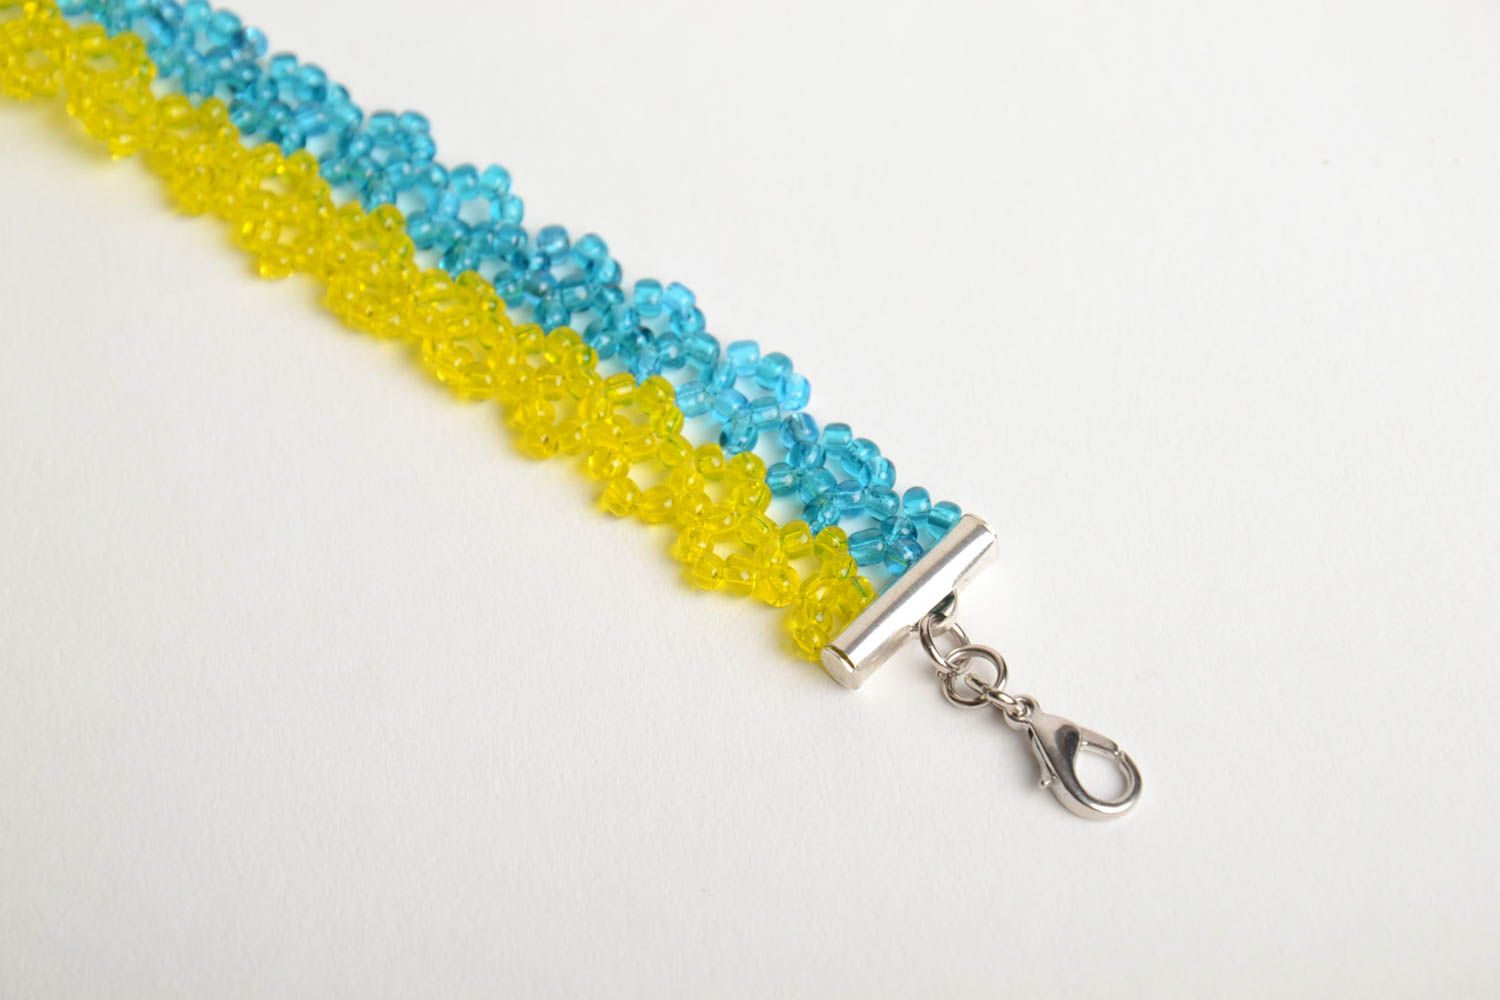 Handmade wrist bracelet crocheted of yellow and blue beads with metal chain photo 5